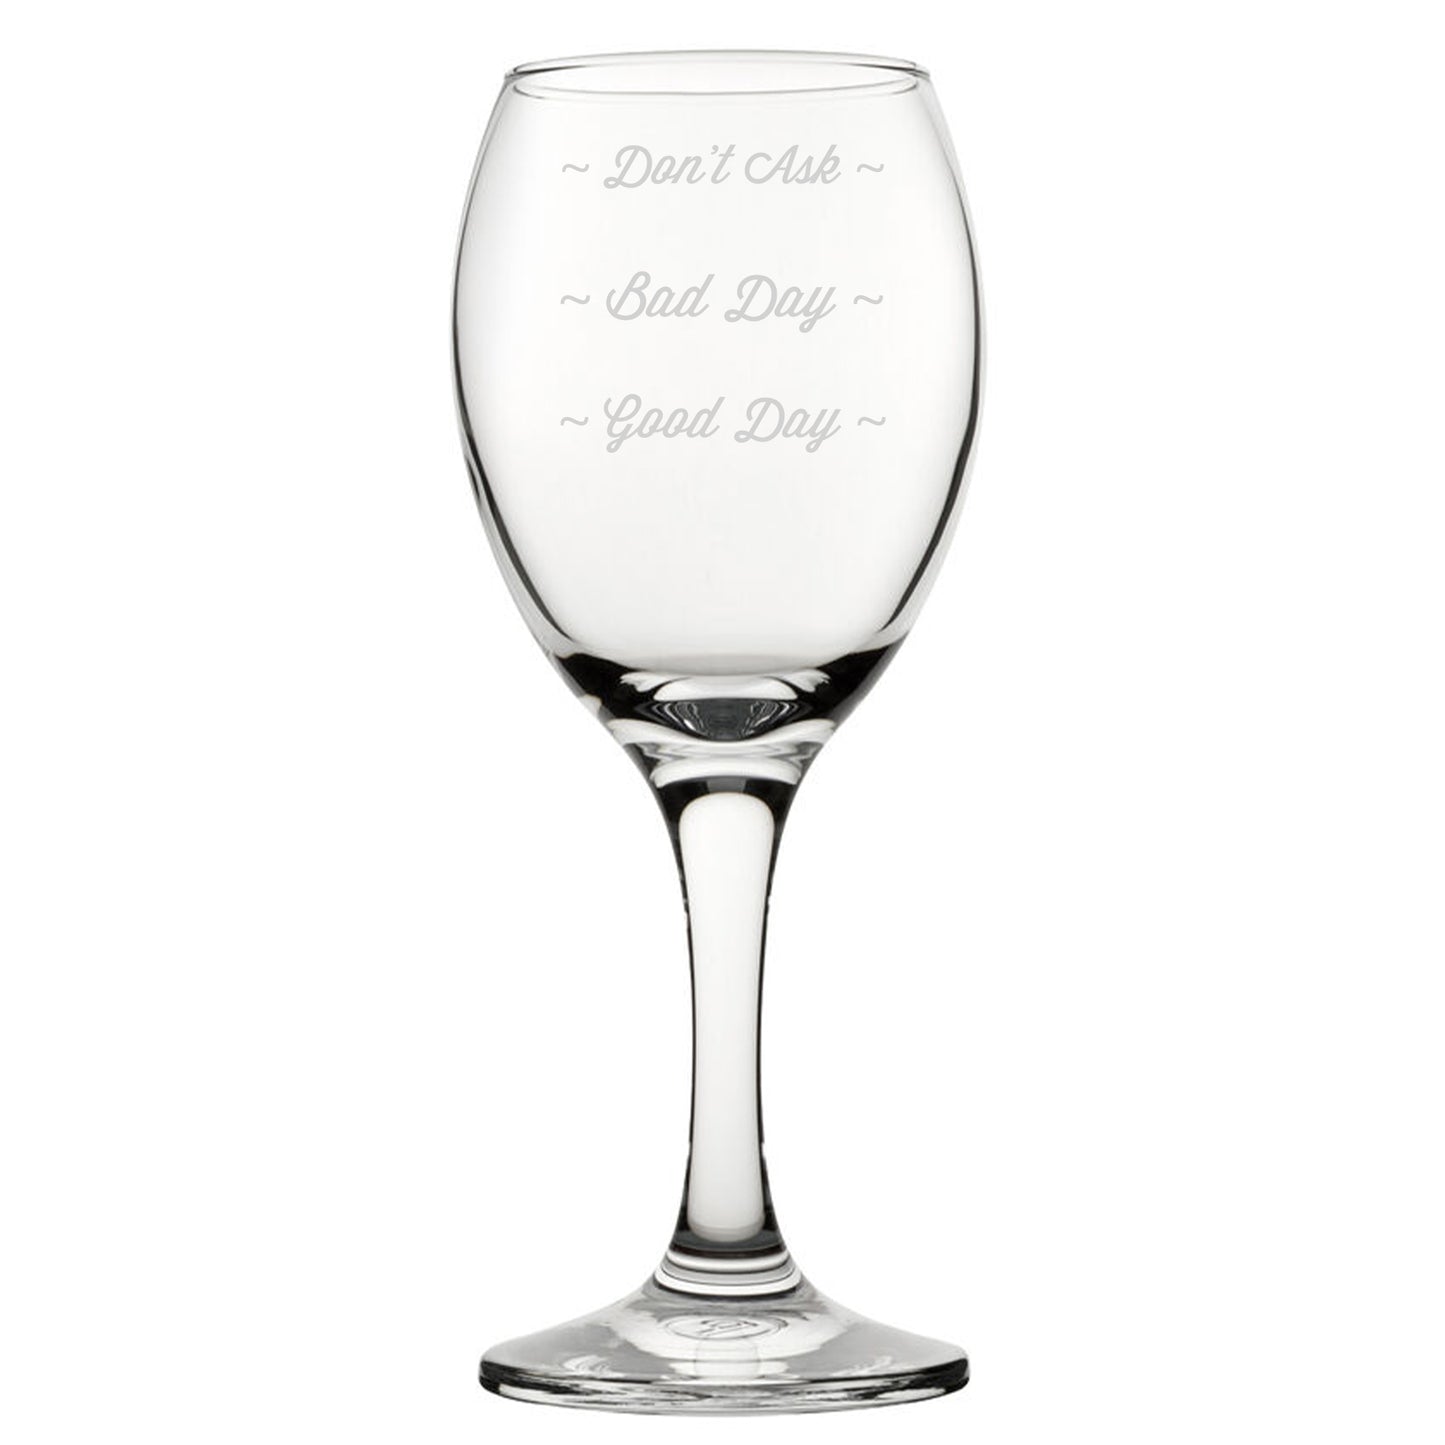 Good Day, Bad Day, Don't Ask - Engraved Novelty Wine Glass Image 2